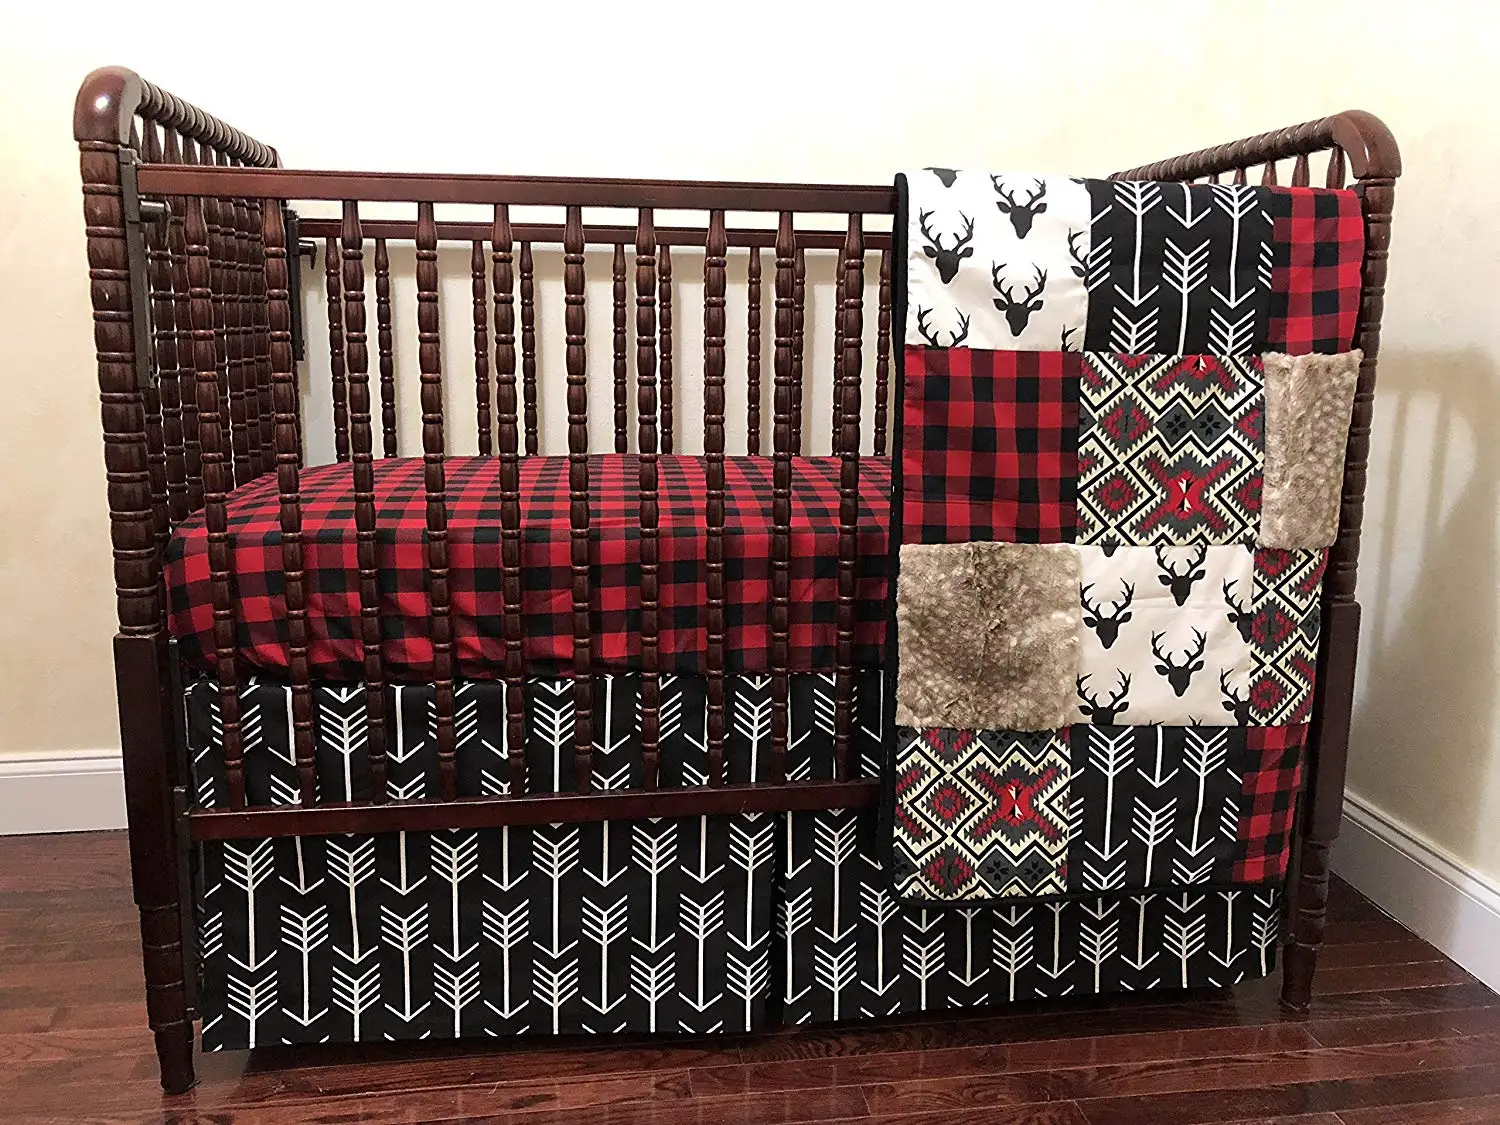 red baby bedding